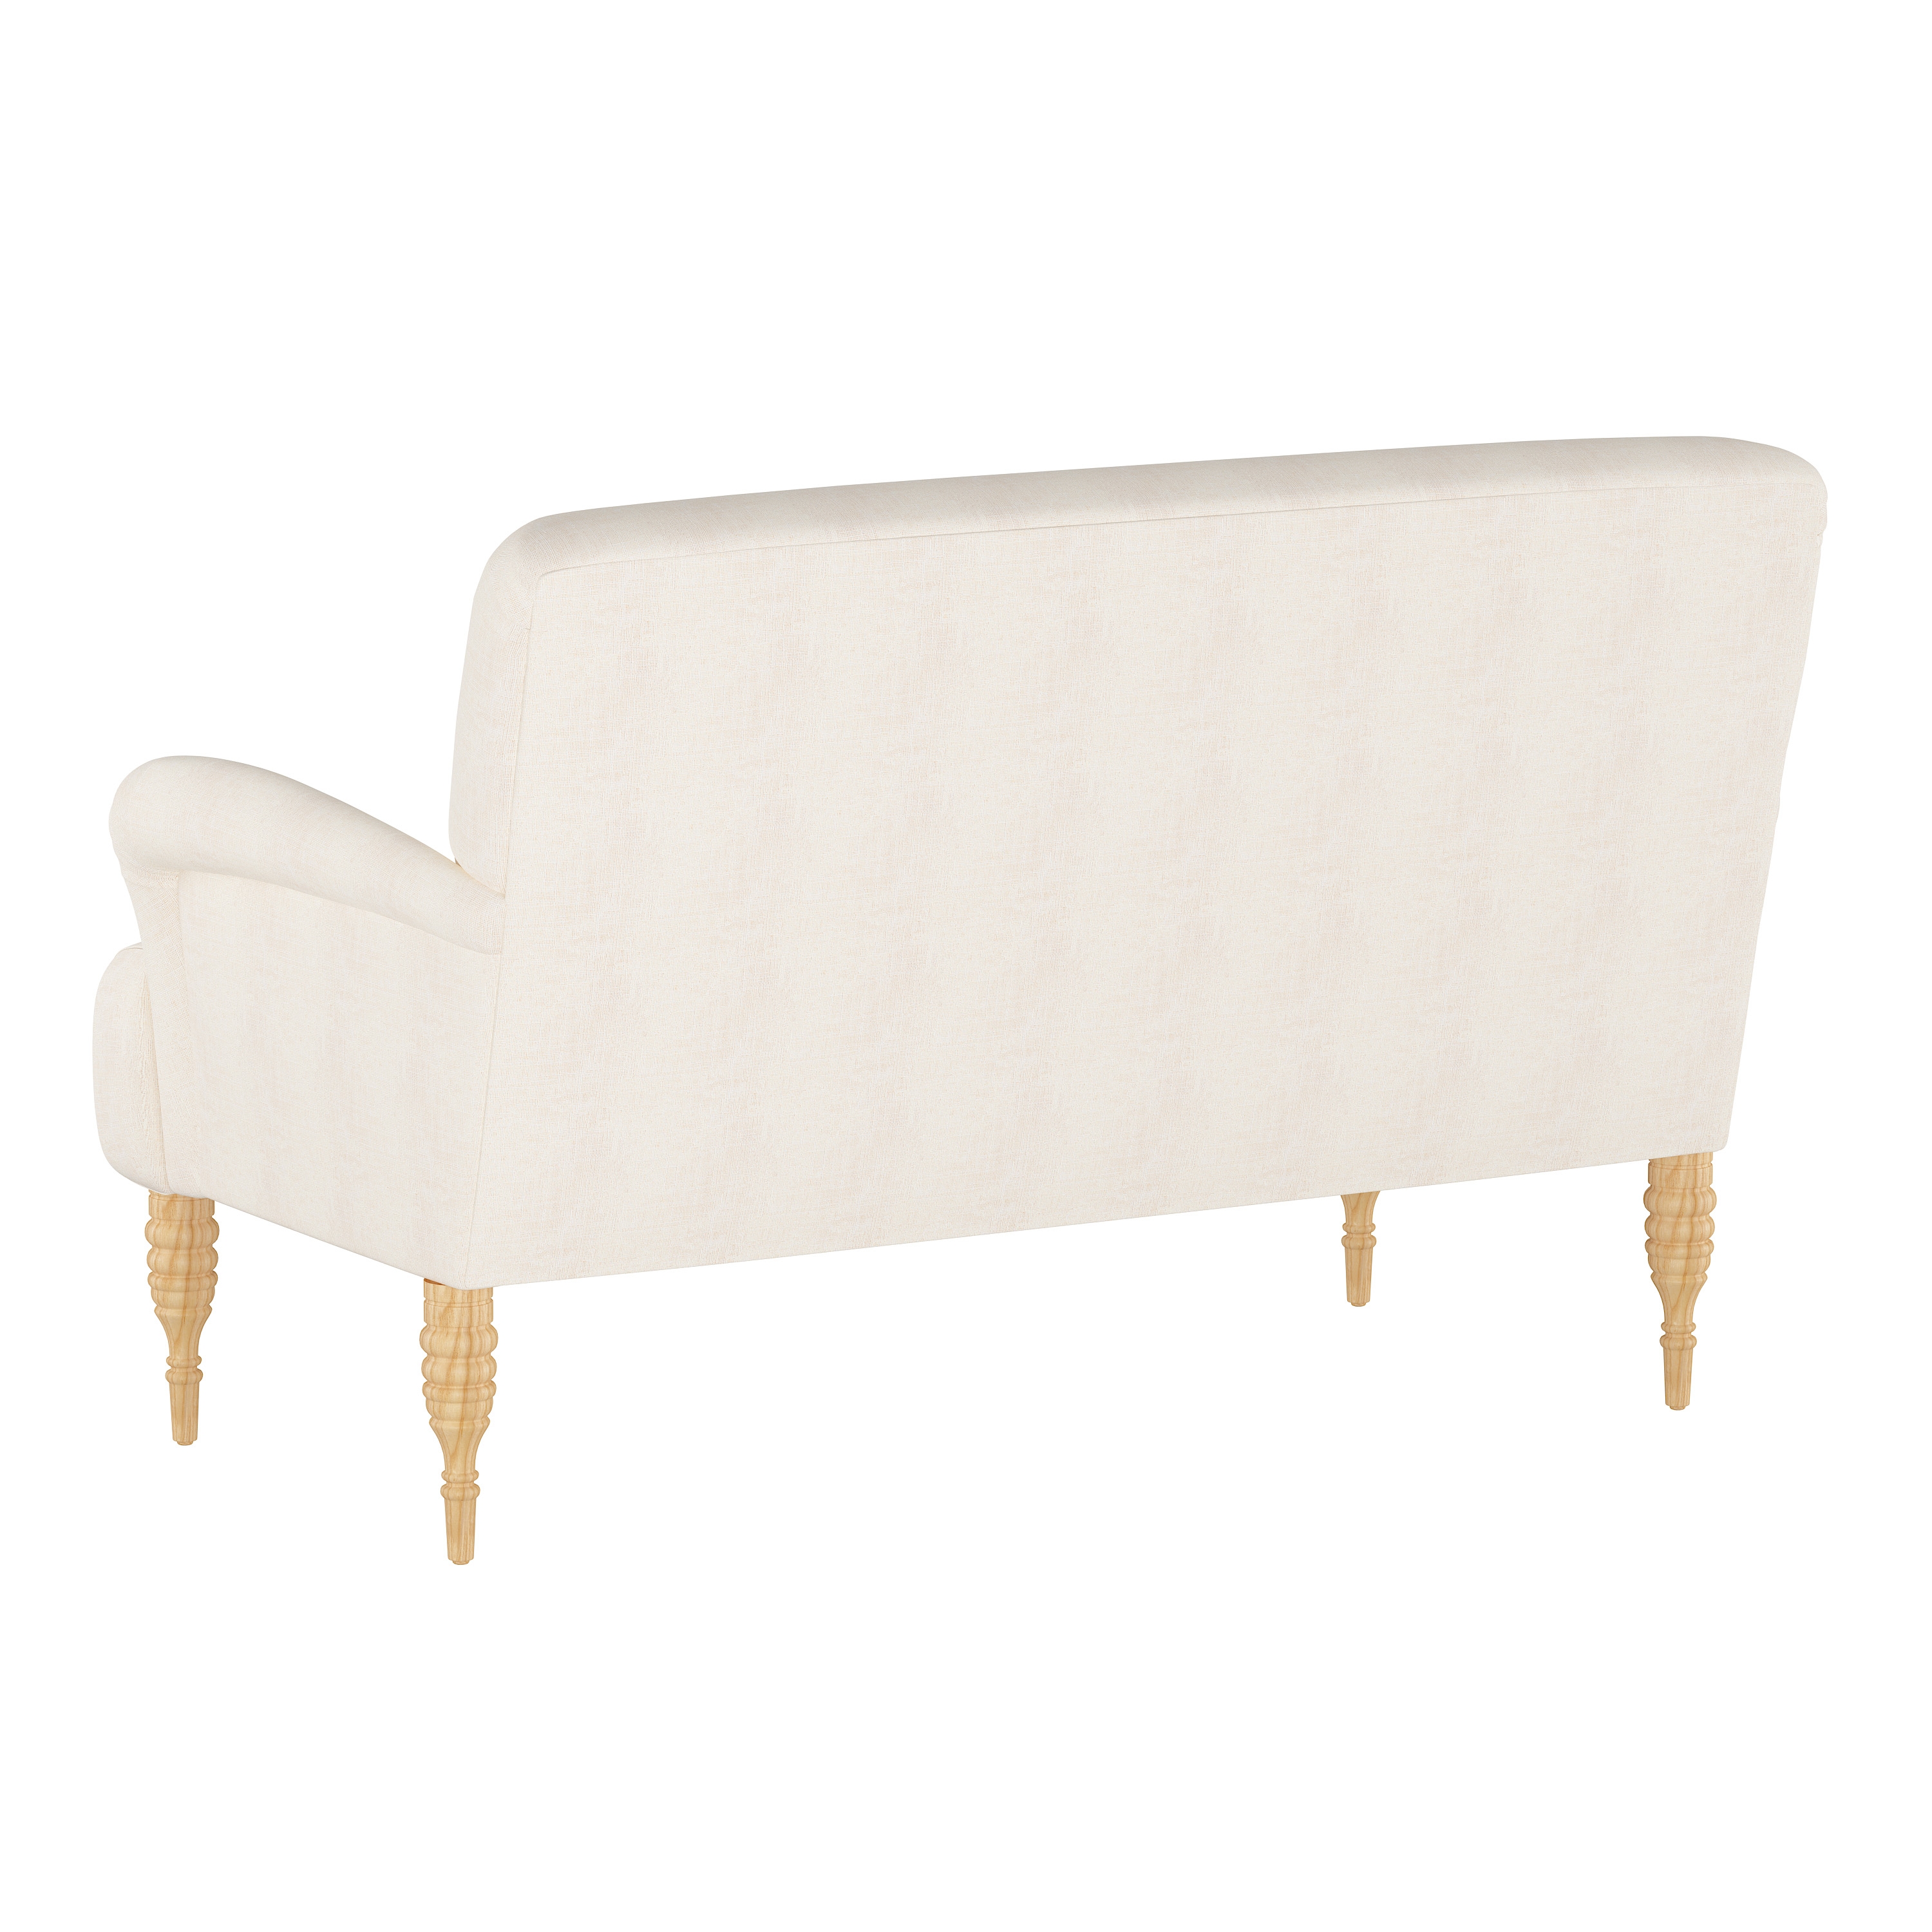 Clermont Settee, White - Image 3